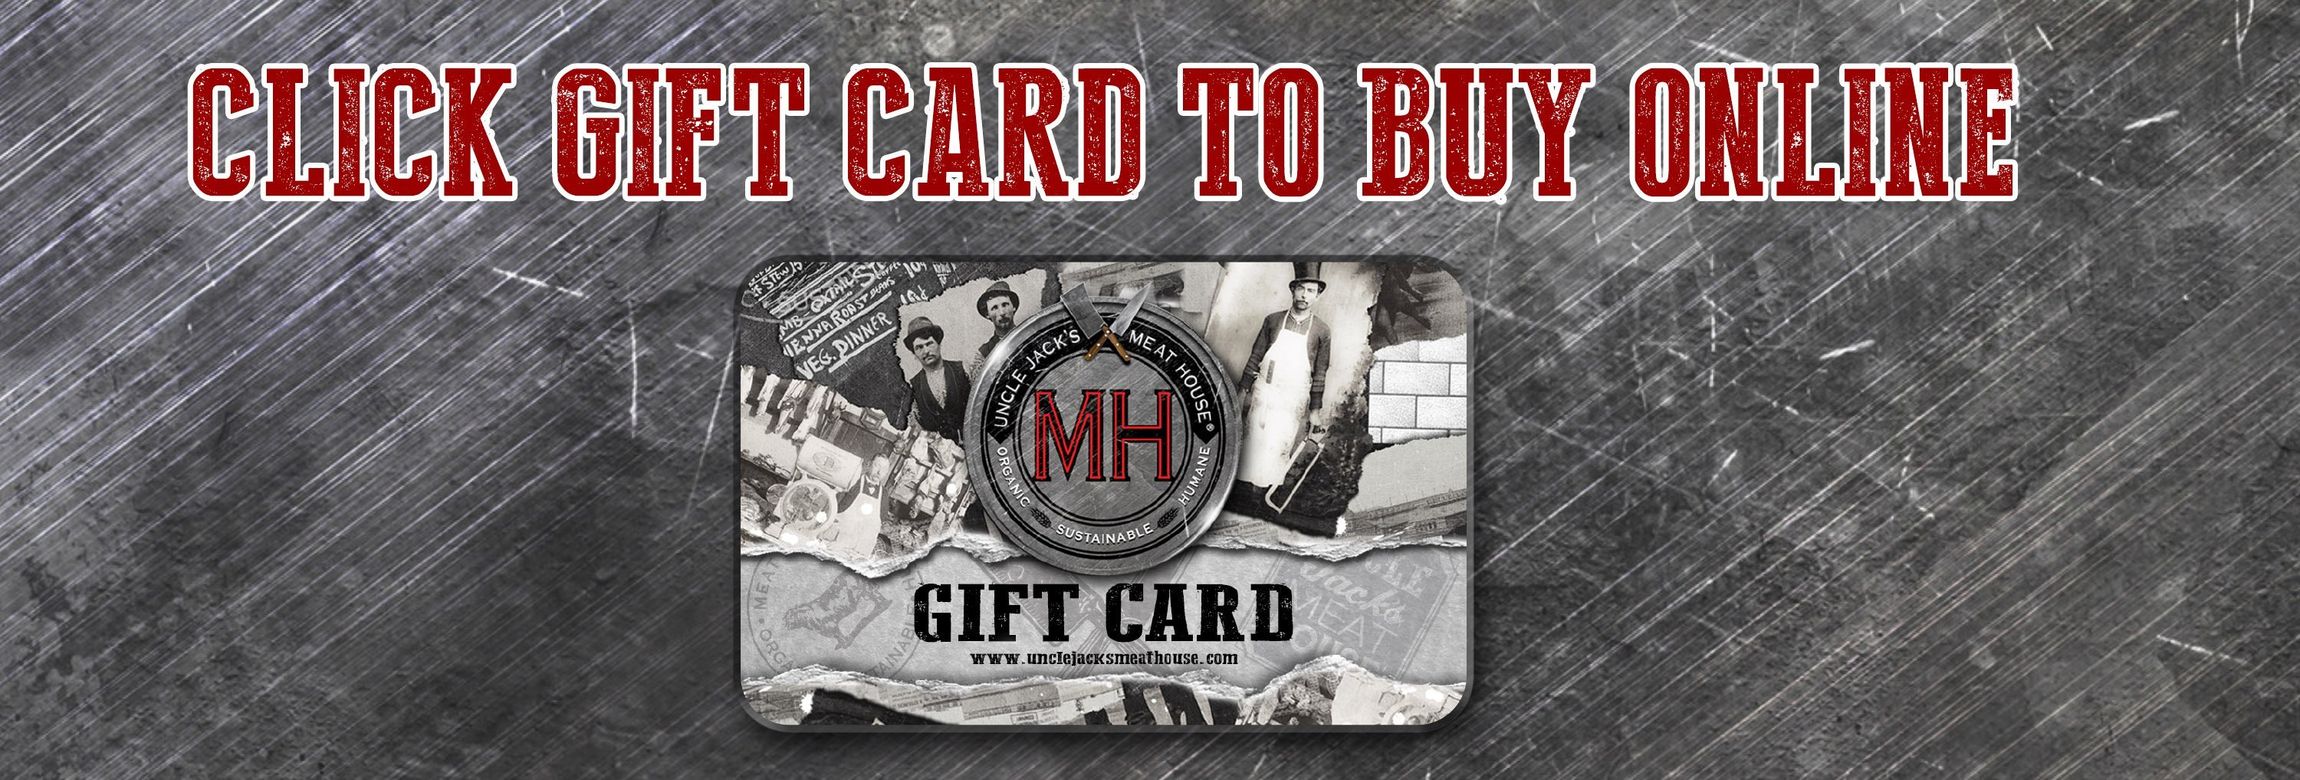 we sell gift cards online and in store